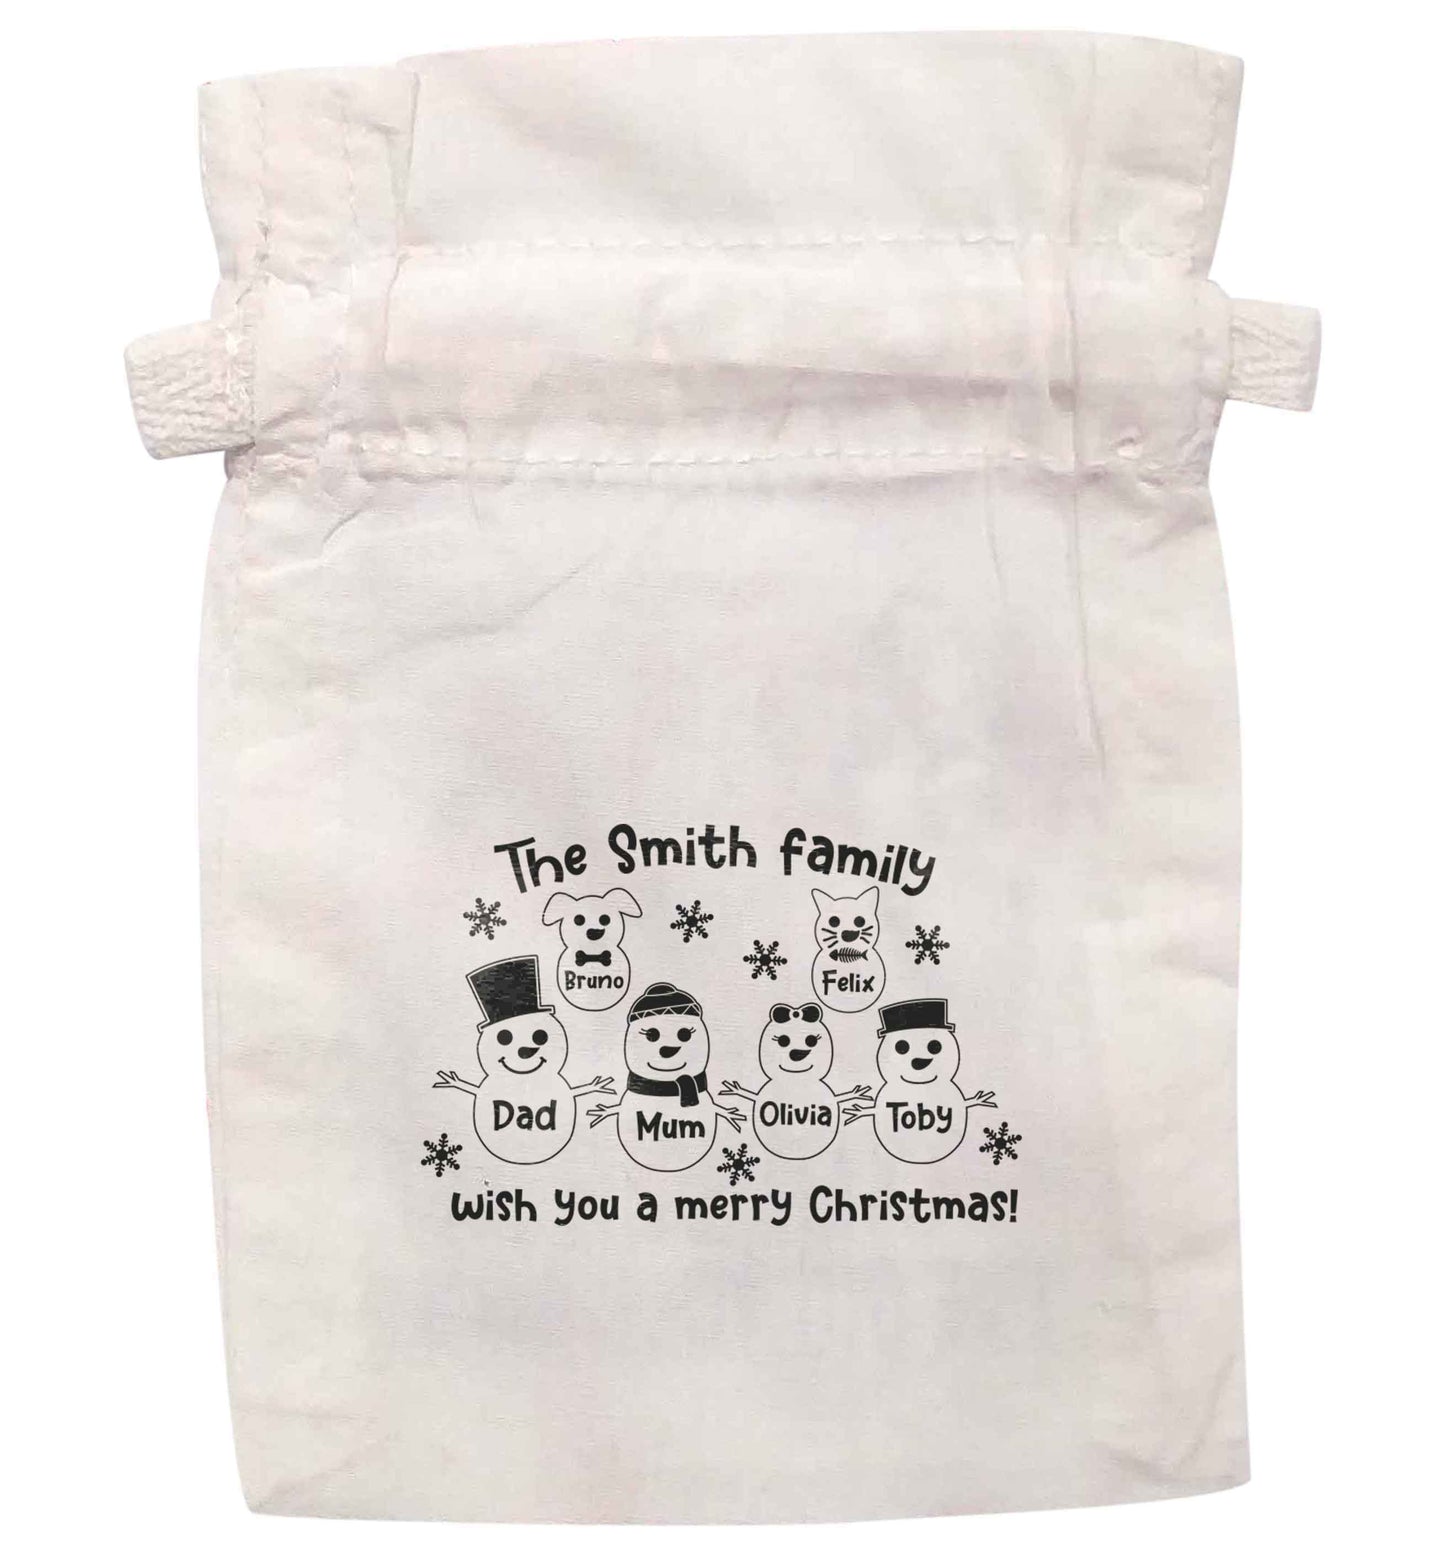 Personalised snowman family mum dad cat dog | XS - L | Pouch / Drawstring bag / Sack | Organic Cotton | Bulk discounts available!